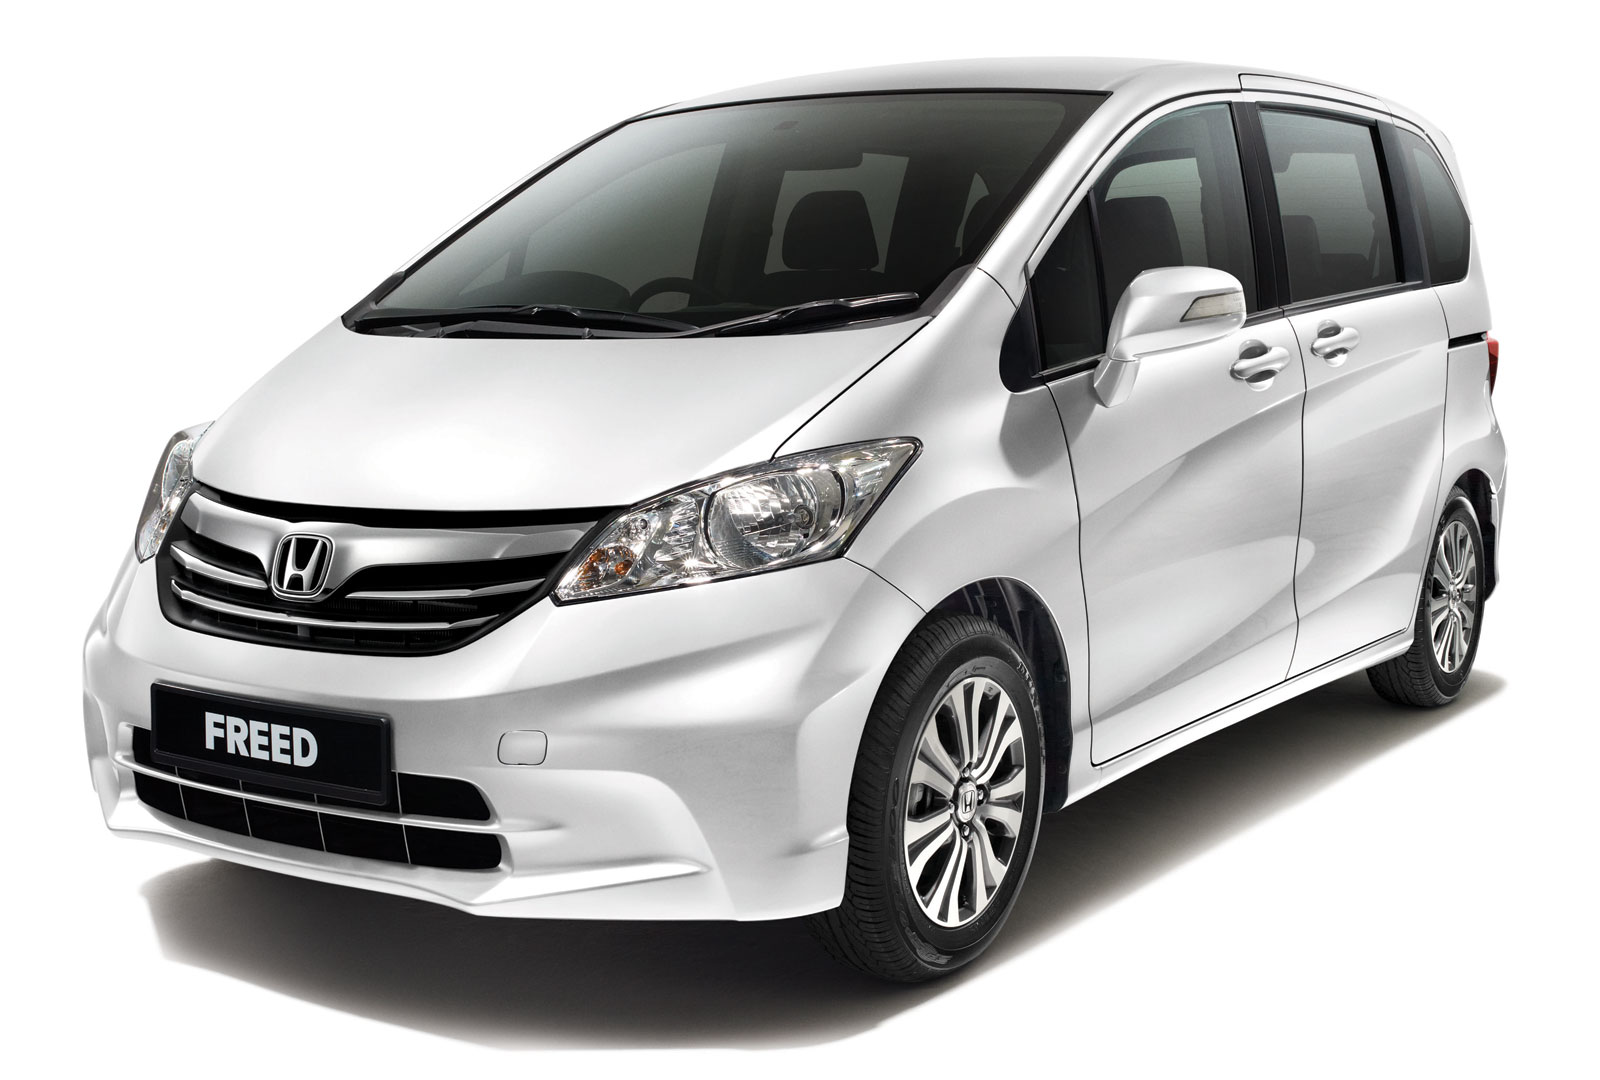 Honda Freed MPV facelifted - RM99,800 to RM113,500 ...